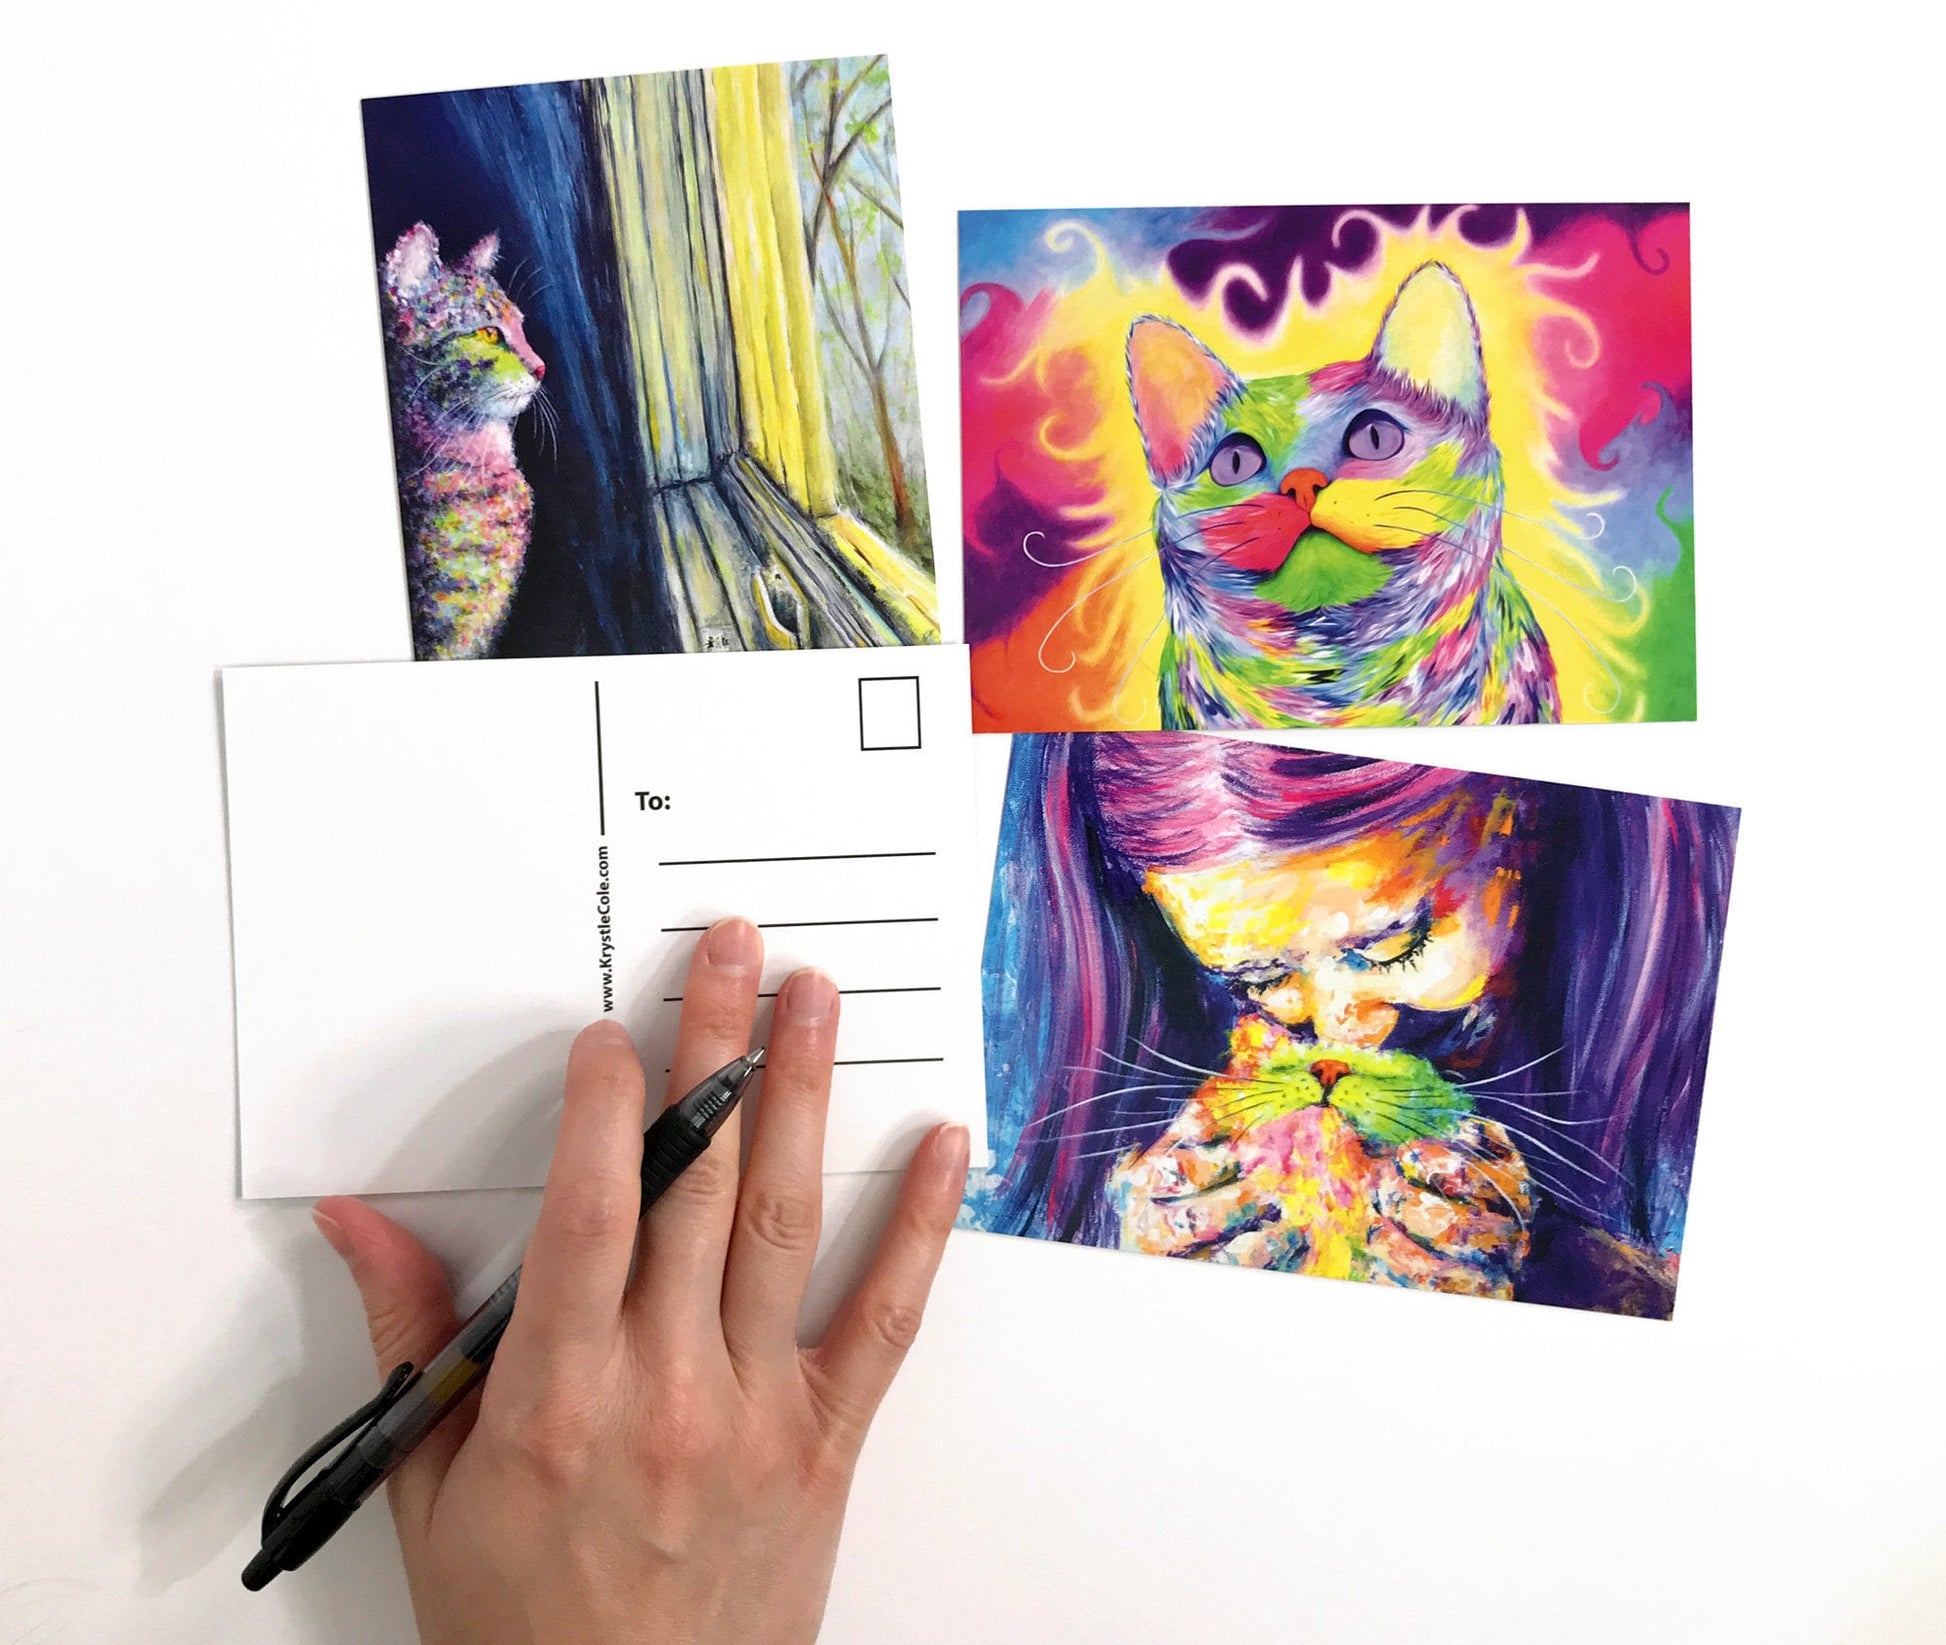 Cat Postcard Set of 3 - Rainbow Cat Postcards, Cat Lover Gifts. Cat Art Post Cards based on Paintings by Krystle Cole